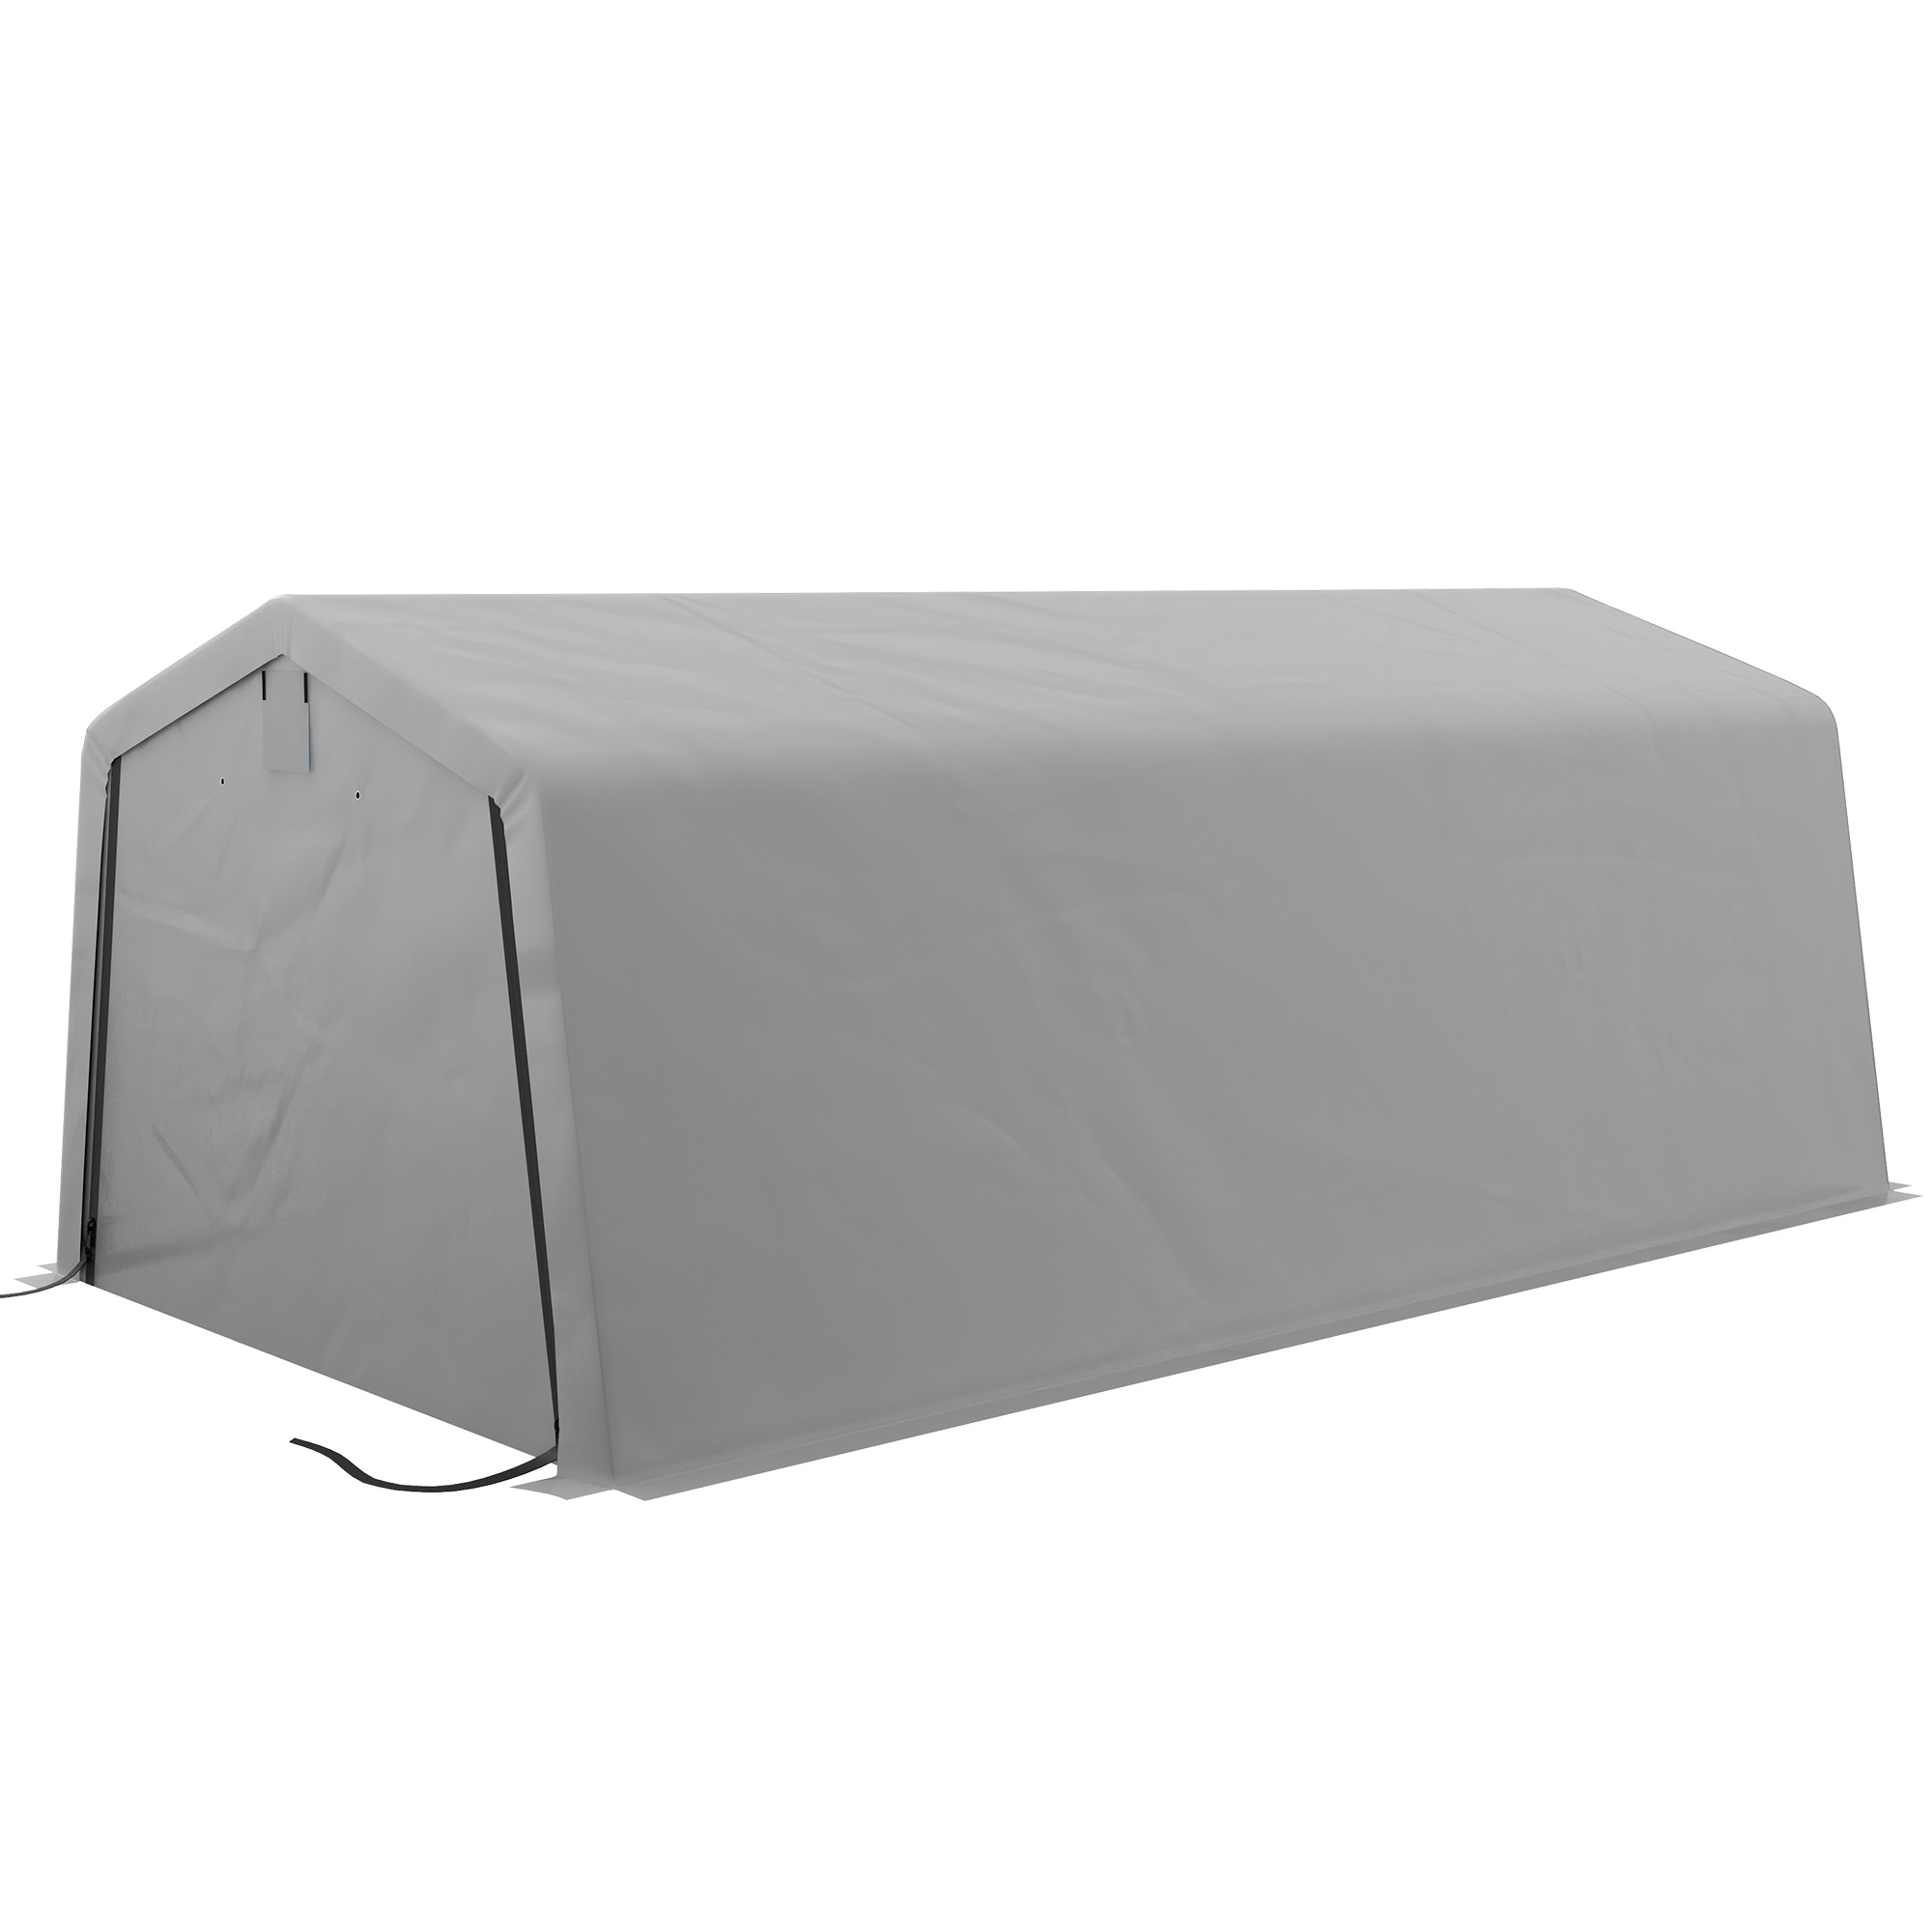 Outsunny Car and Party Tent με 2 πλαϊνά παράθυρα